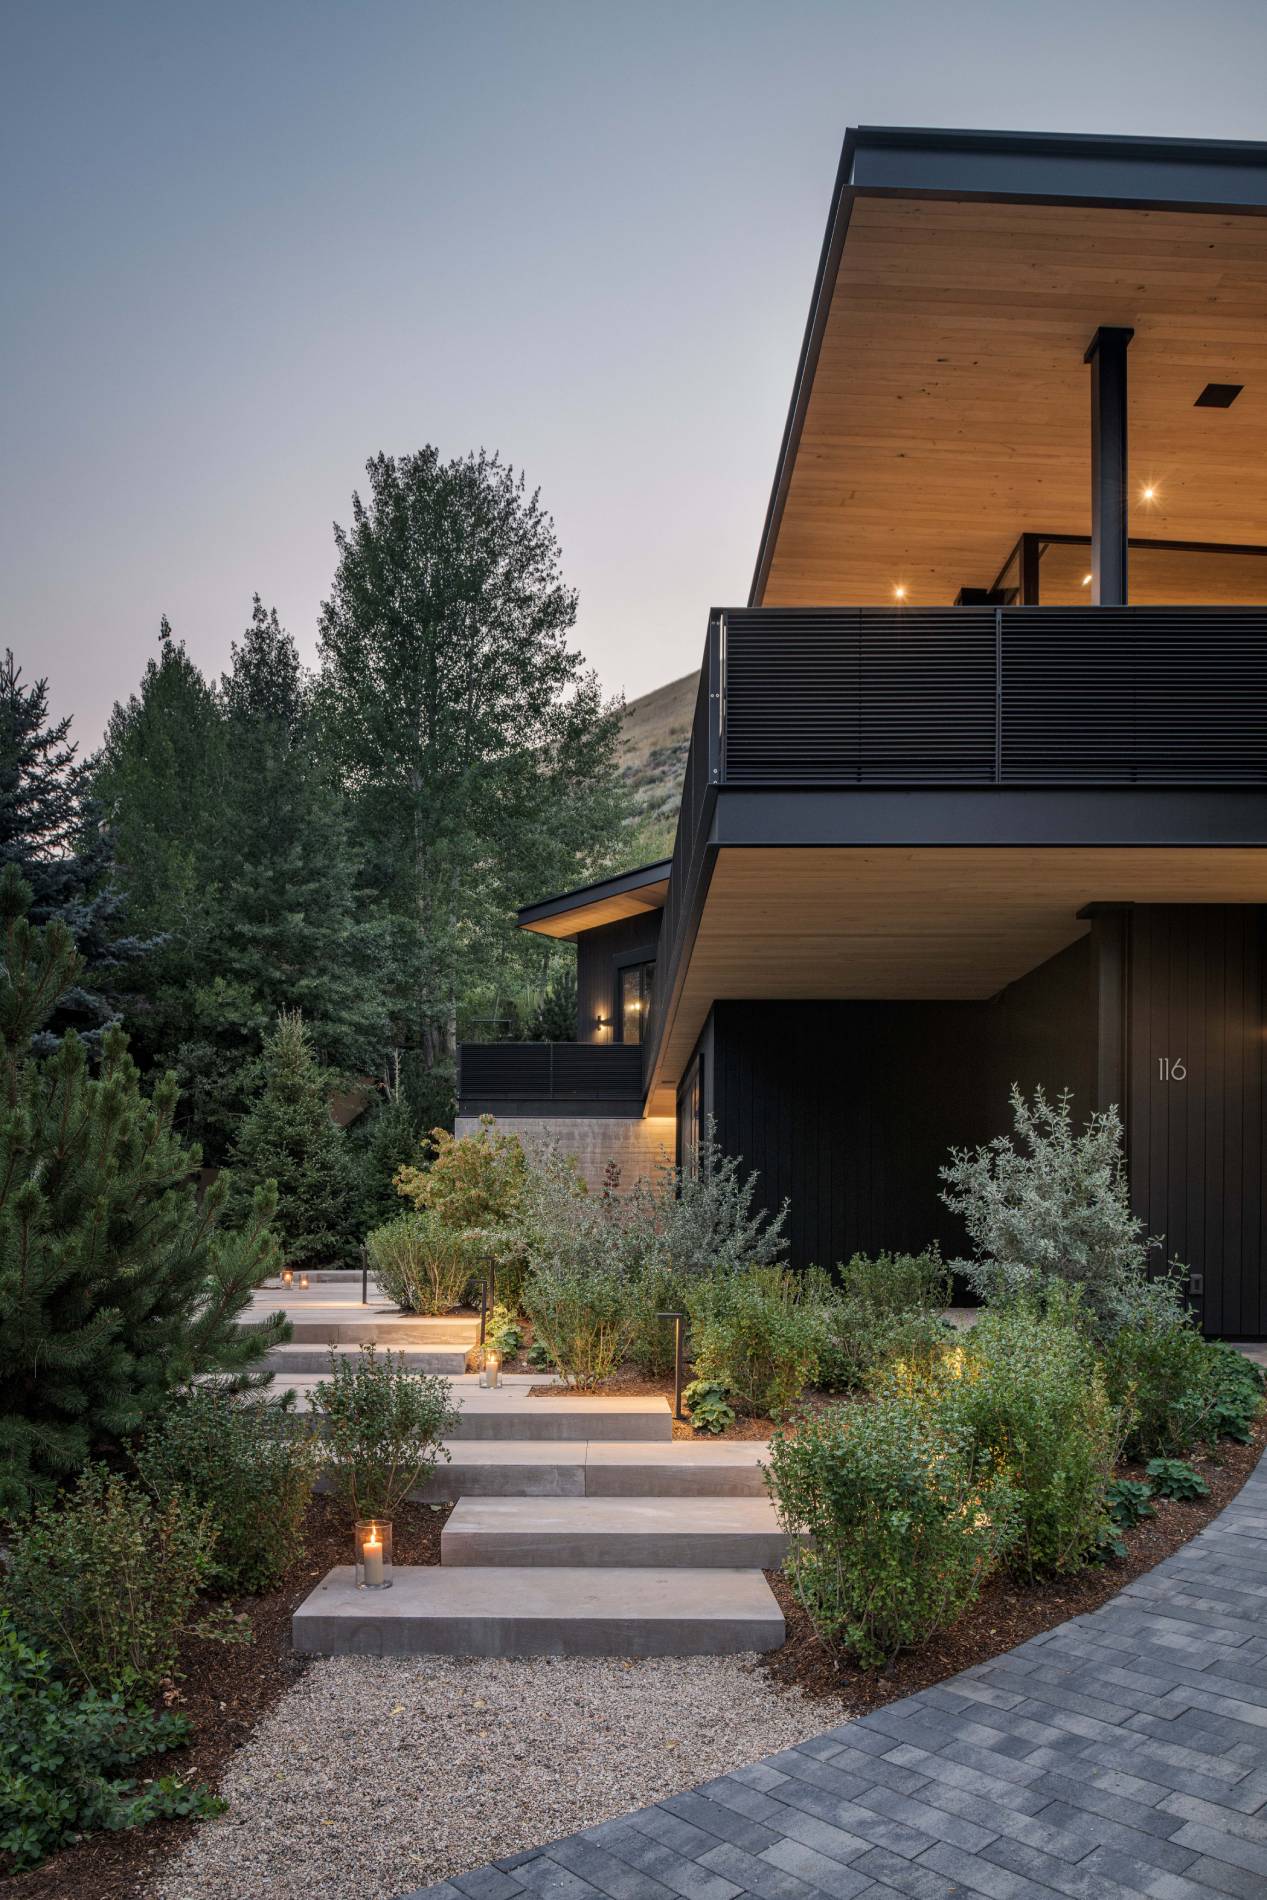 Exterior view of the landscaping and walkway at Avalanche Chalet, a custom home designed and built by Farmer Payne Architects.